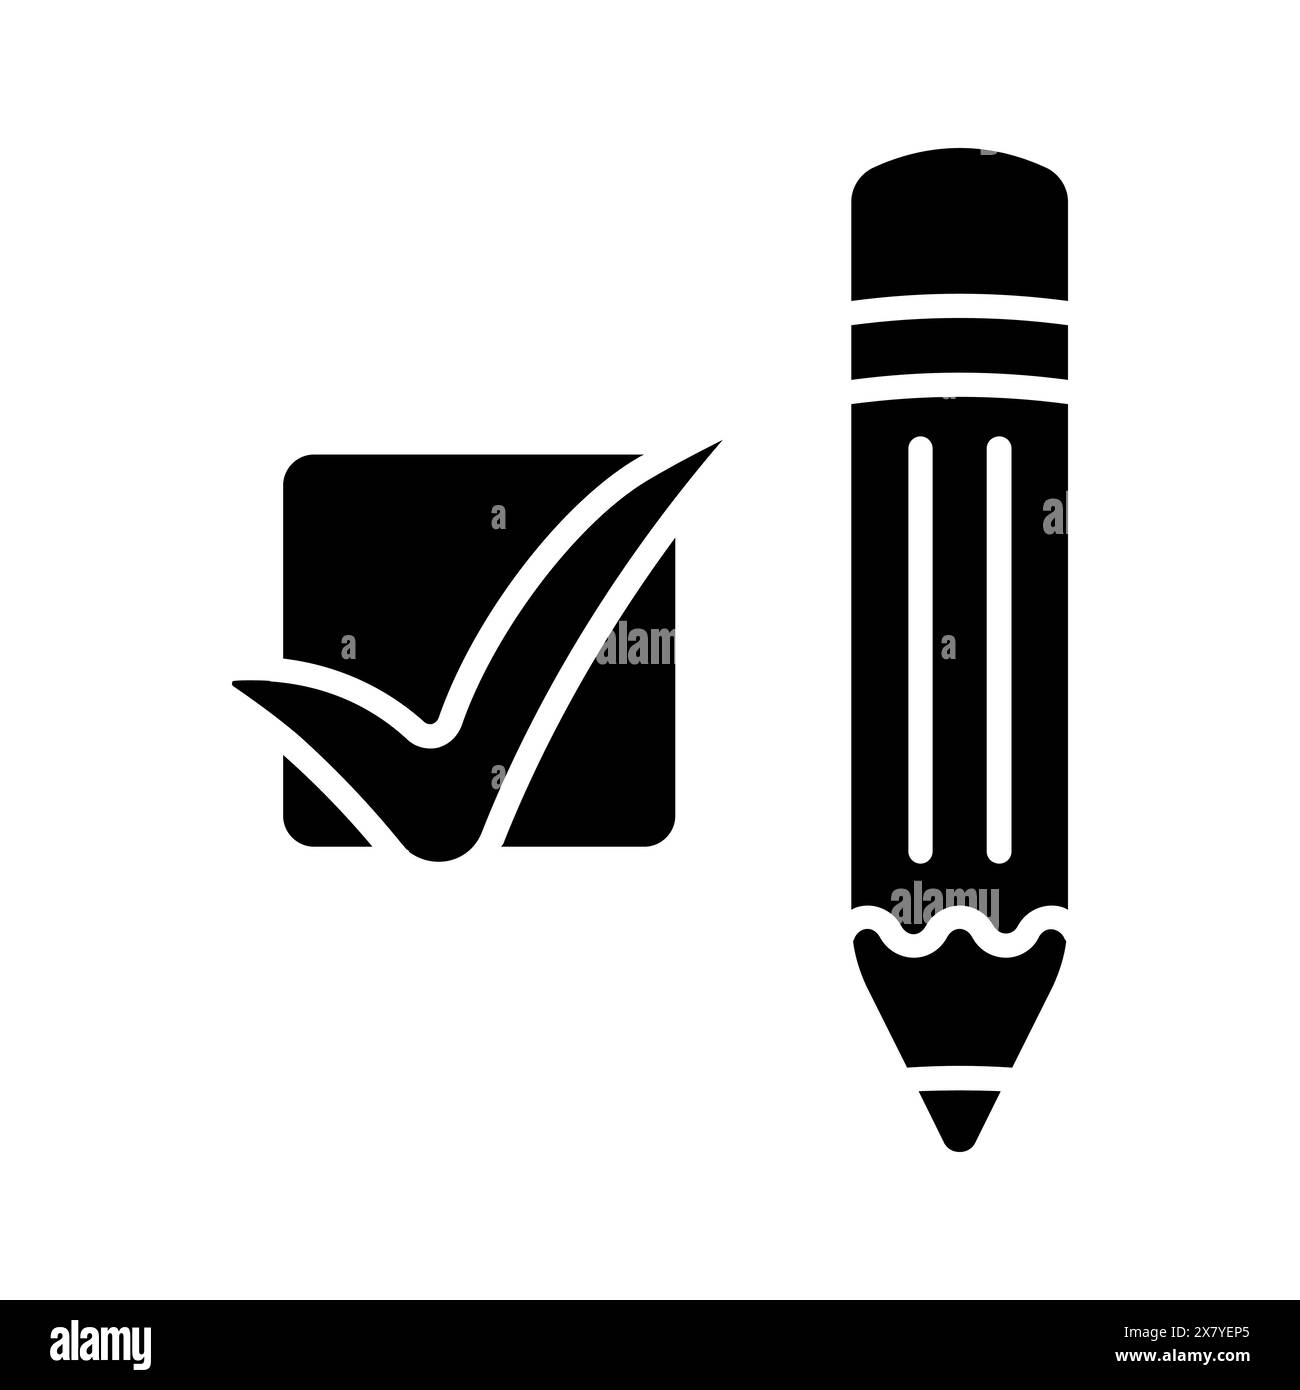 Pencil with a cross and a tick. Elections, check stamps, voting, candidate, voter, polling station, president, parliament, debate, election campaign. Stock Vector